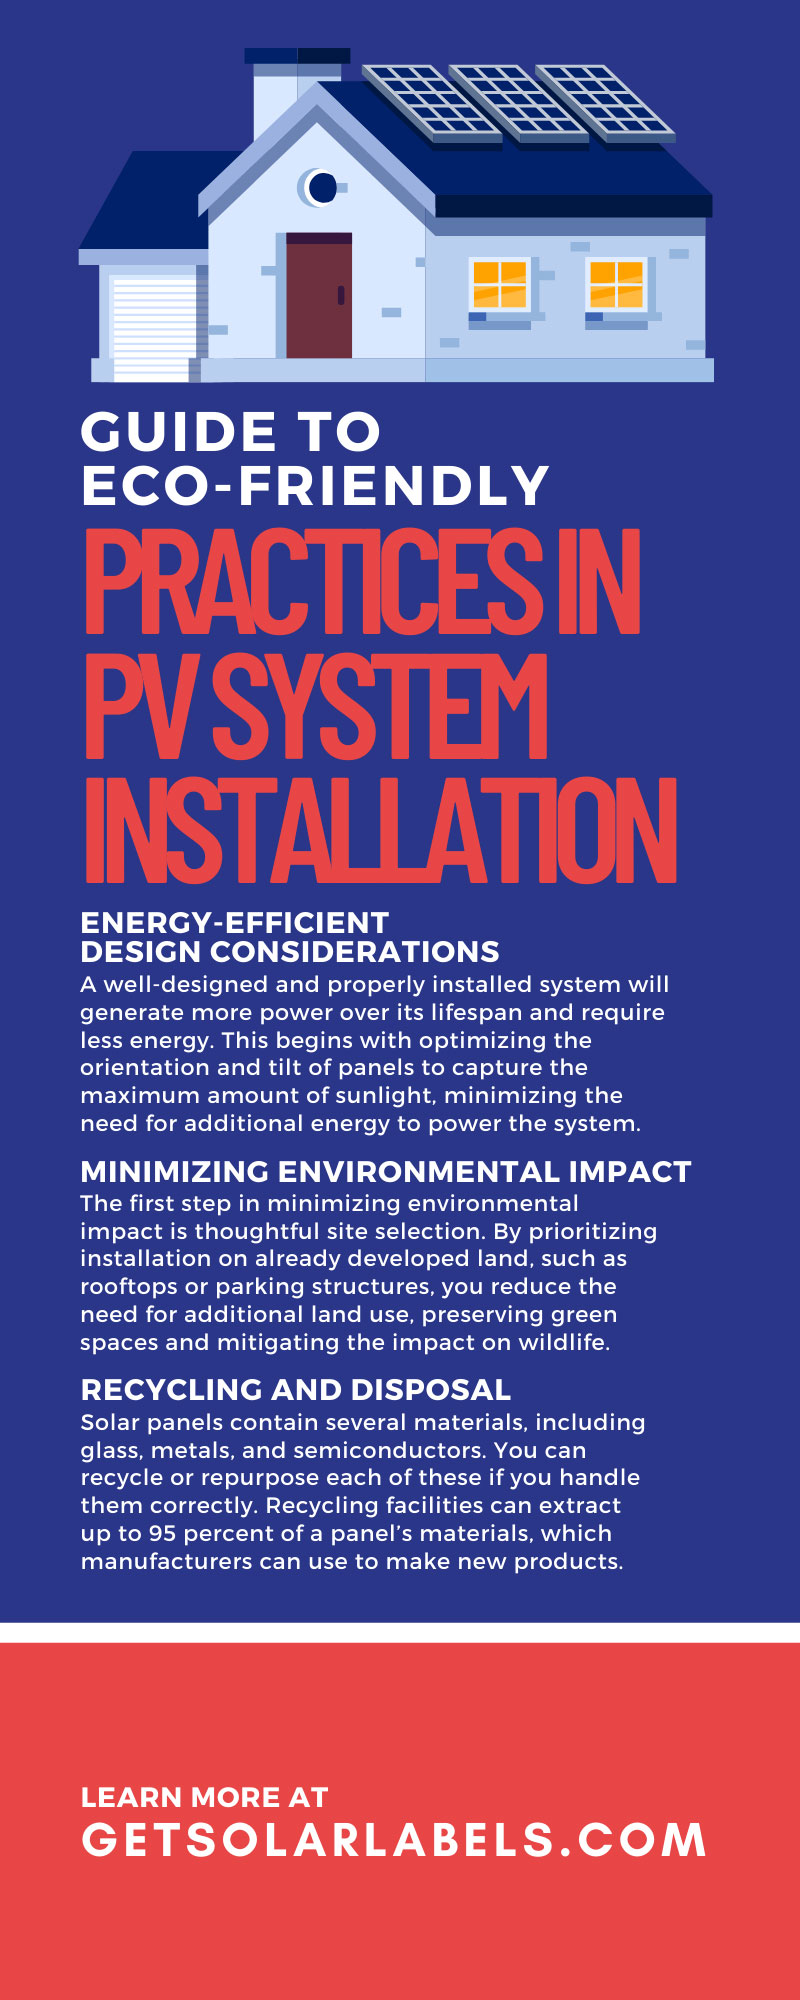 Guide to Eco-Friendly Practices in PV System Installation